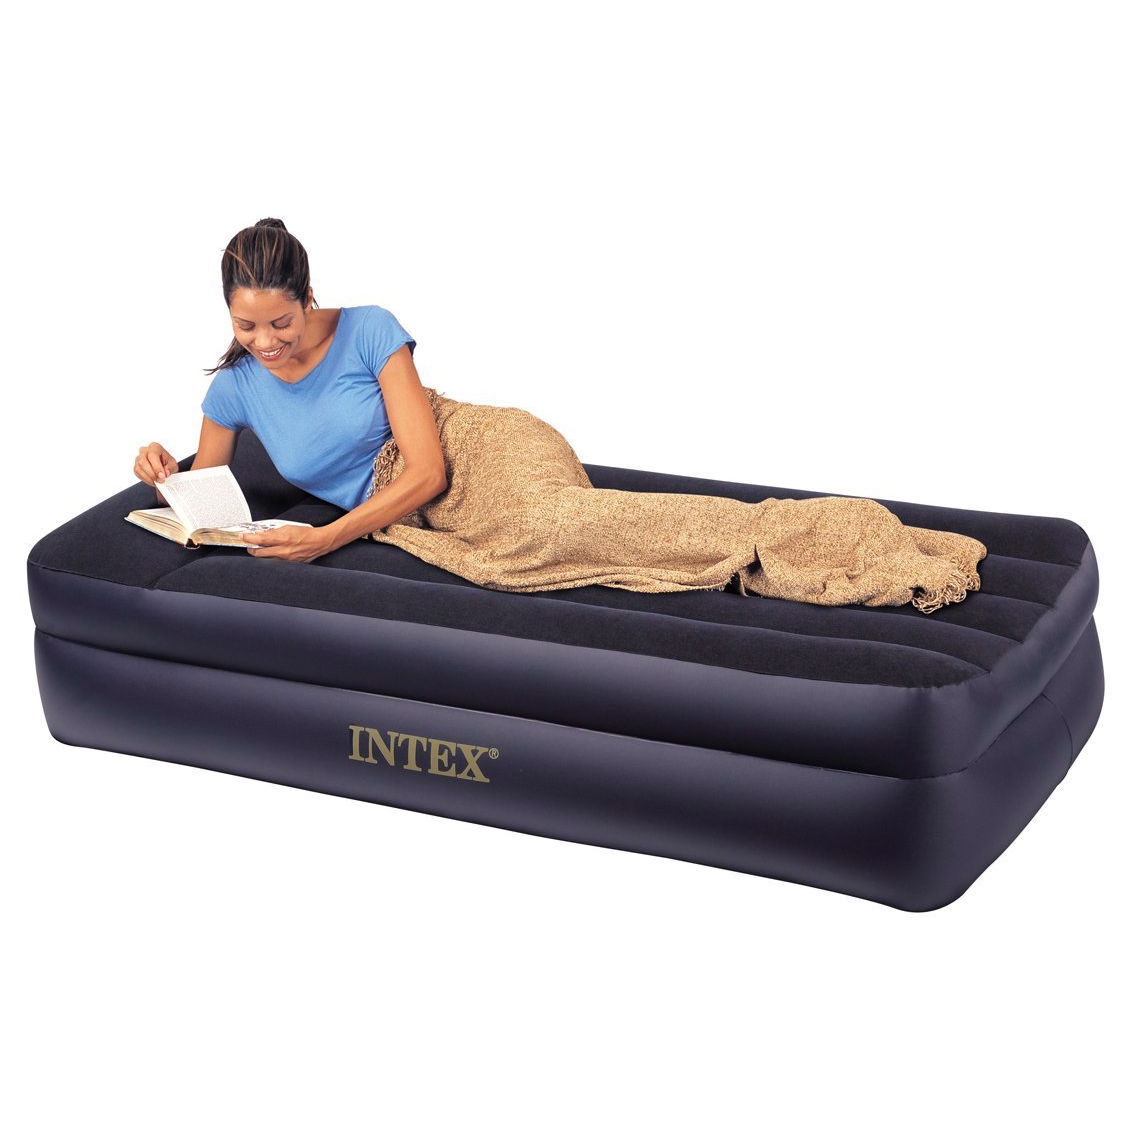 Twin Pillow Rest Raised Air Mattress with Built-in Air Bed Pump